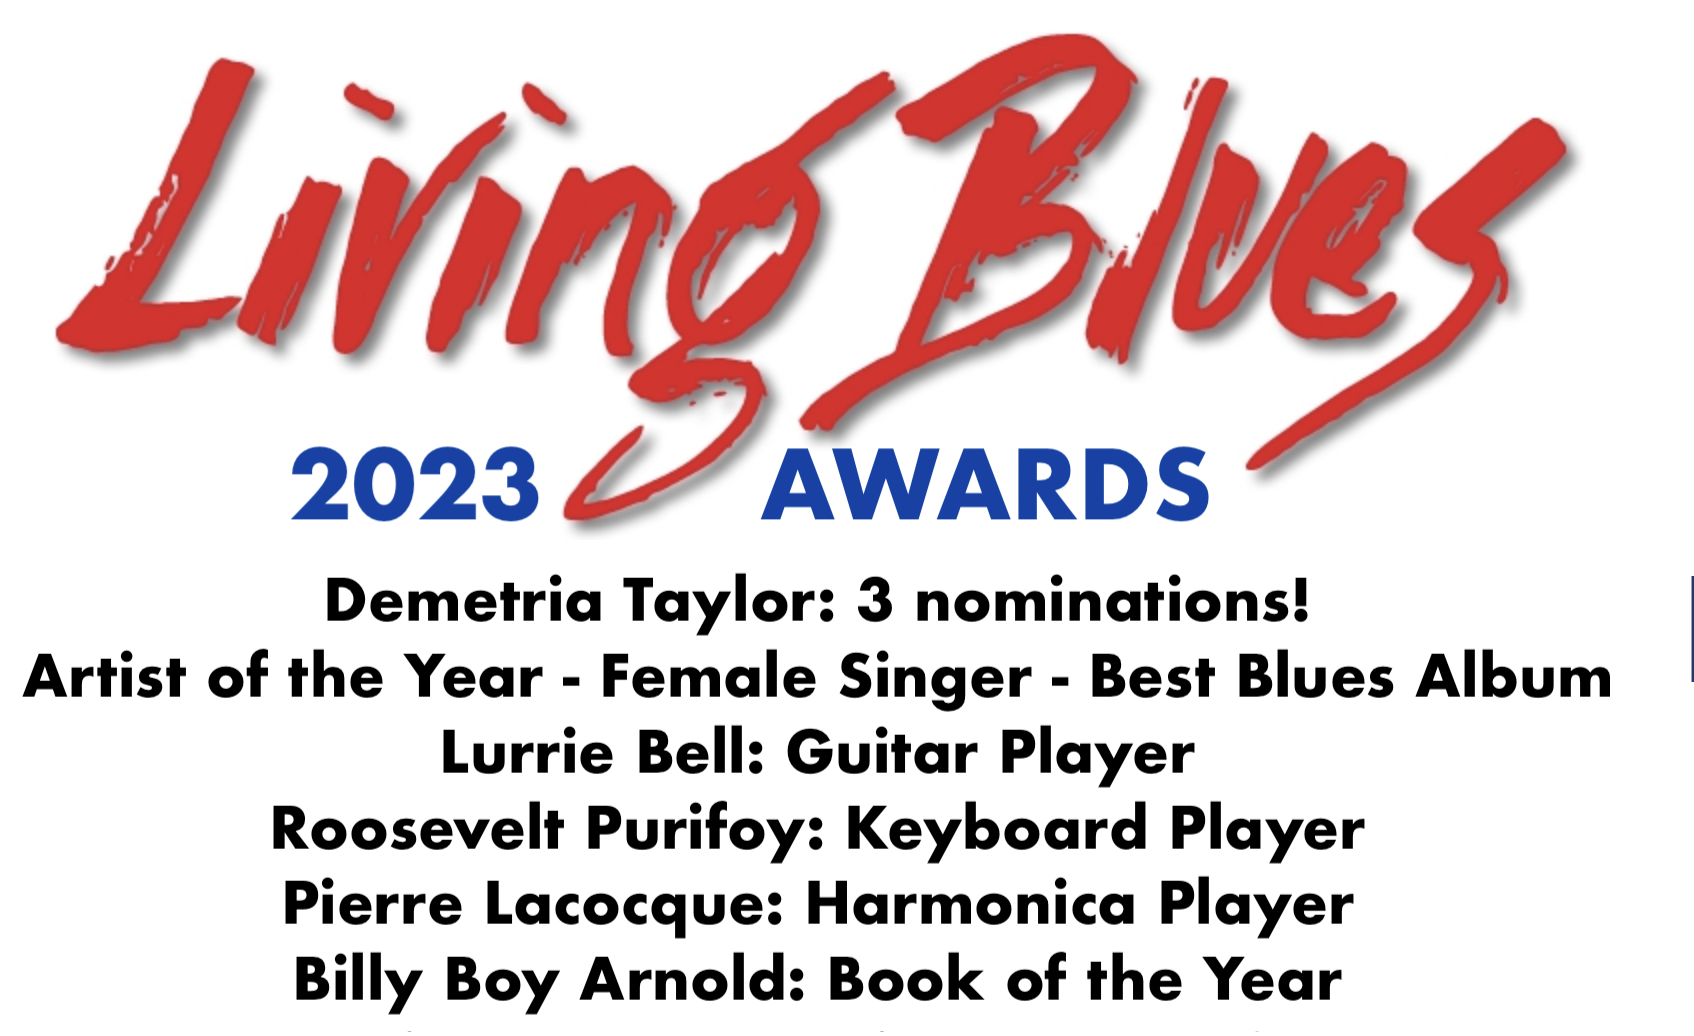 5 DELMARK blues artists receive a total of 7 nominations in the